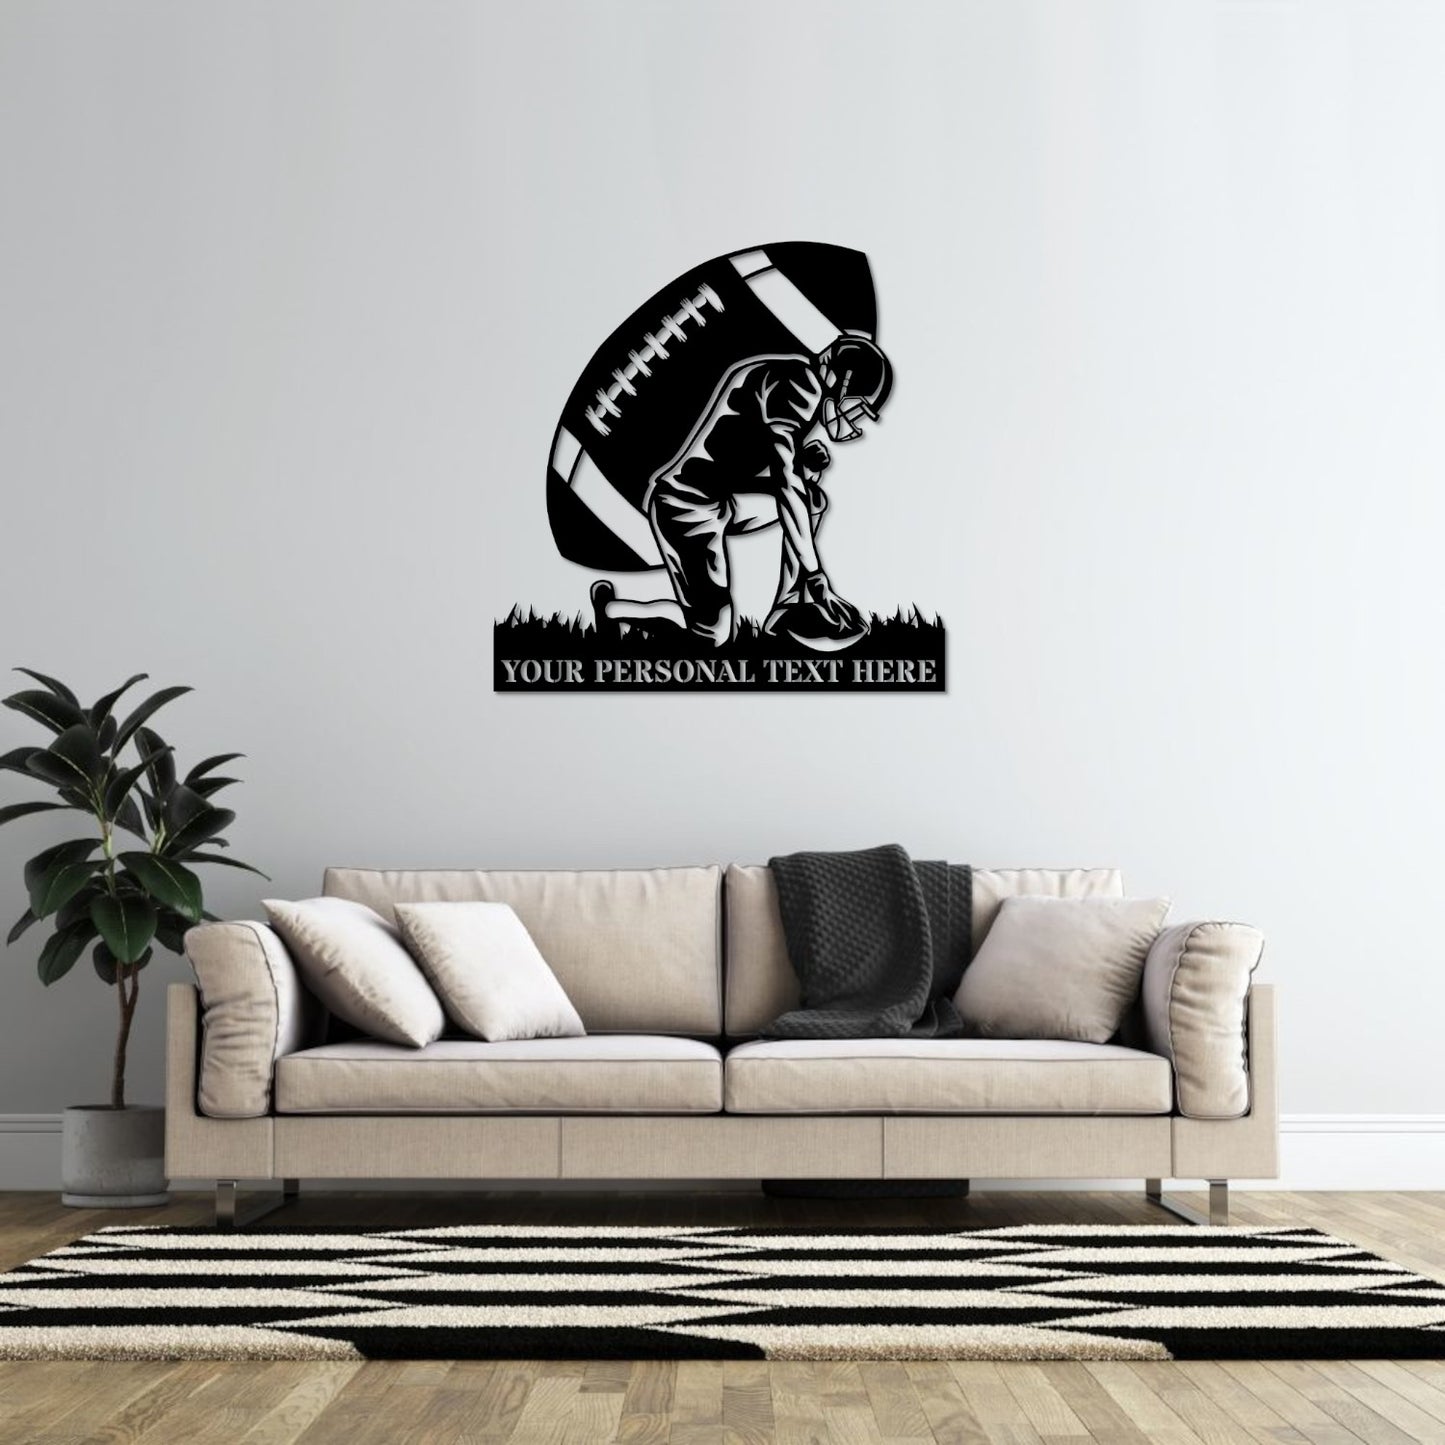 American Football Player Game Name Metal Sign. Custom Football Lover Wall Decor Gift. Sports Lover Present. Child Room Sports Wall Hanging